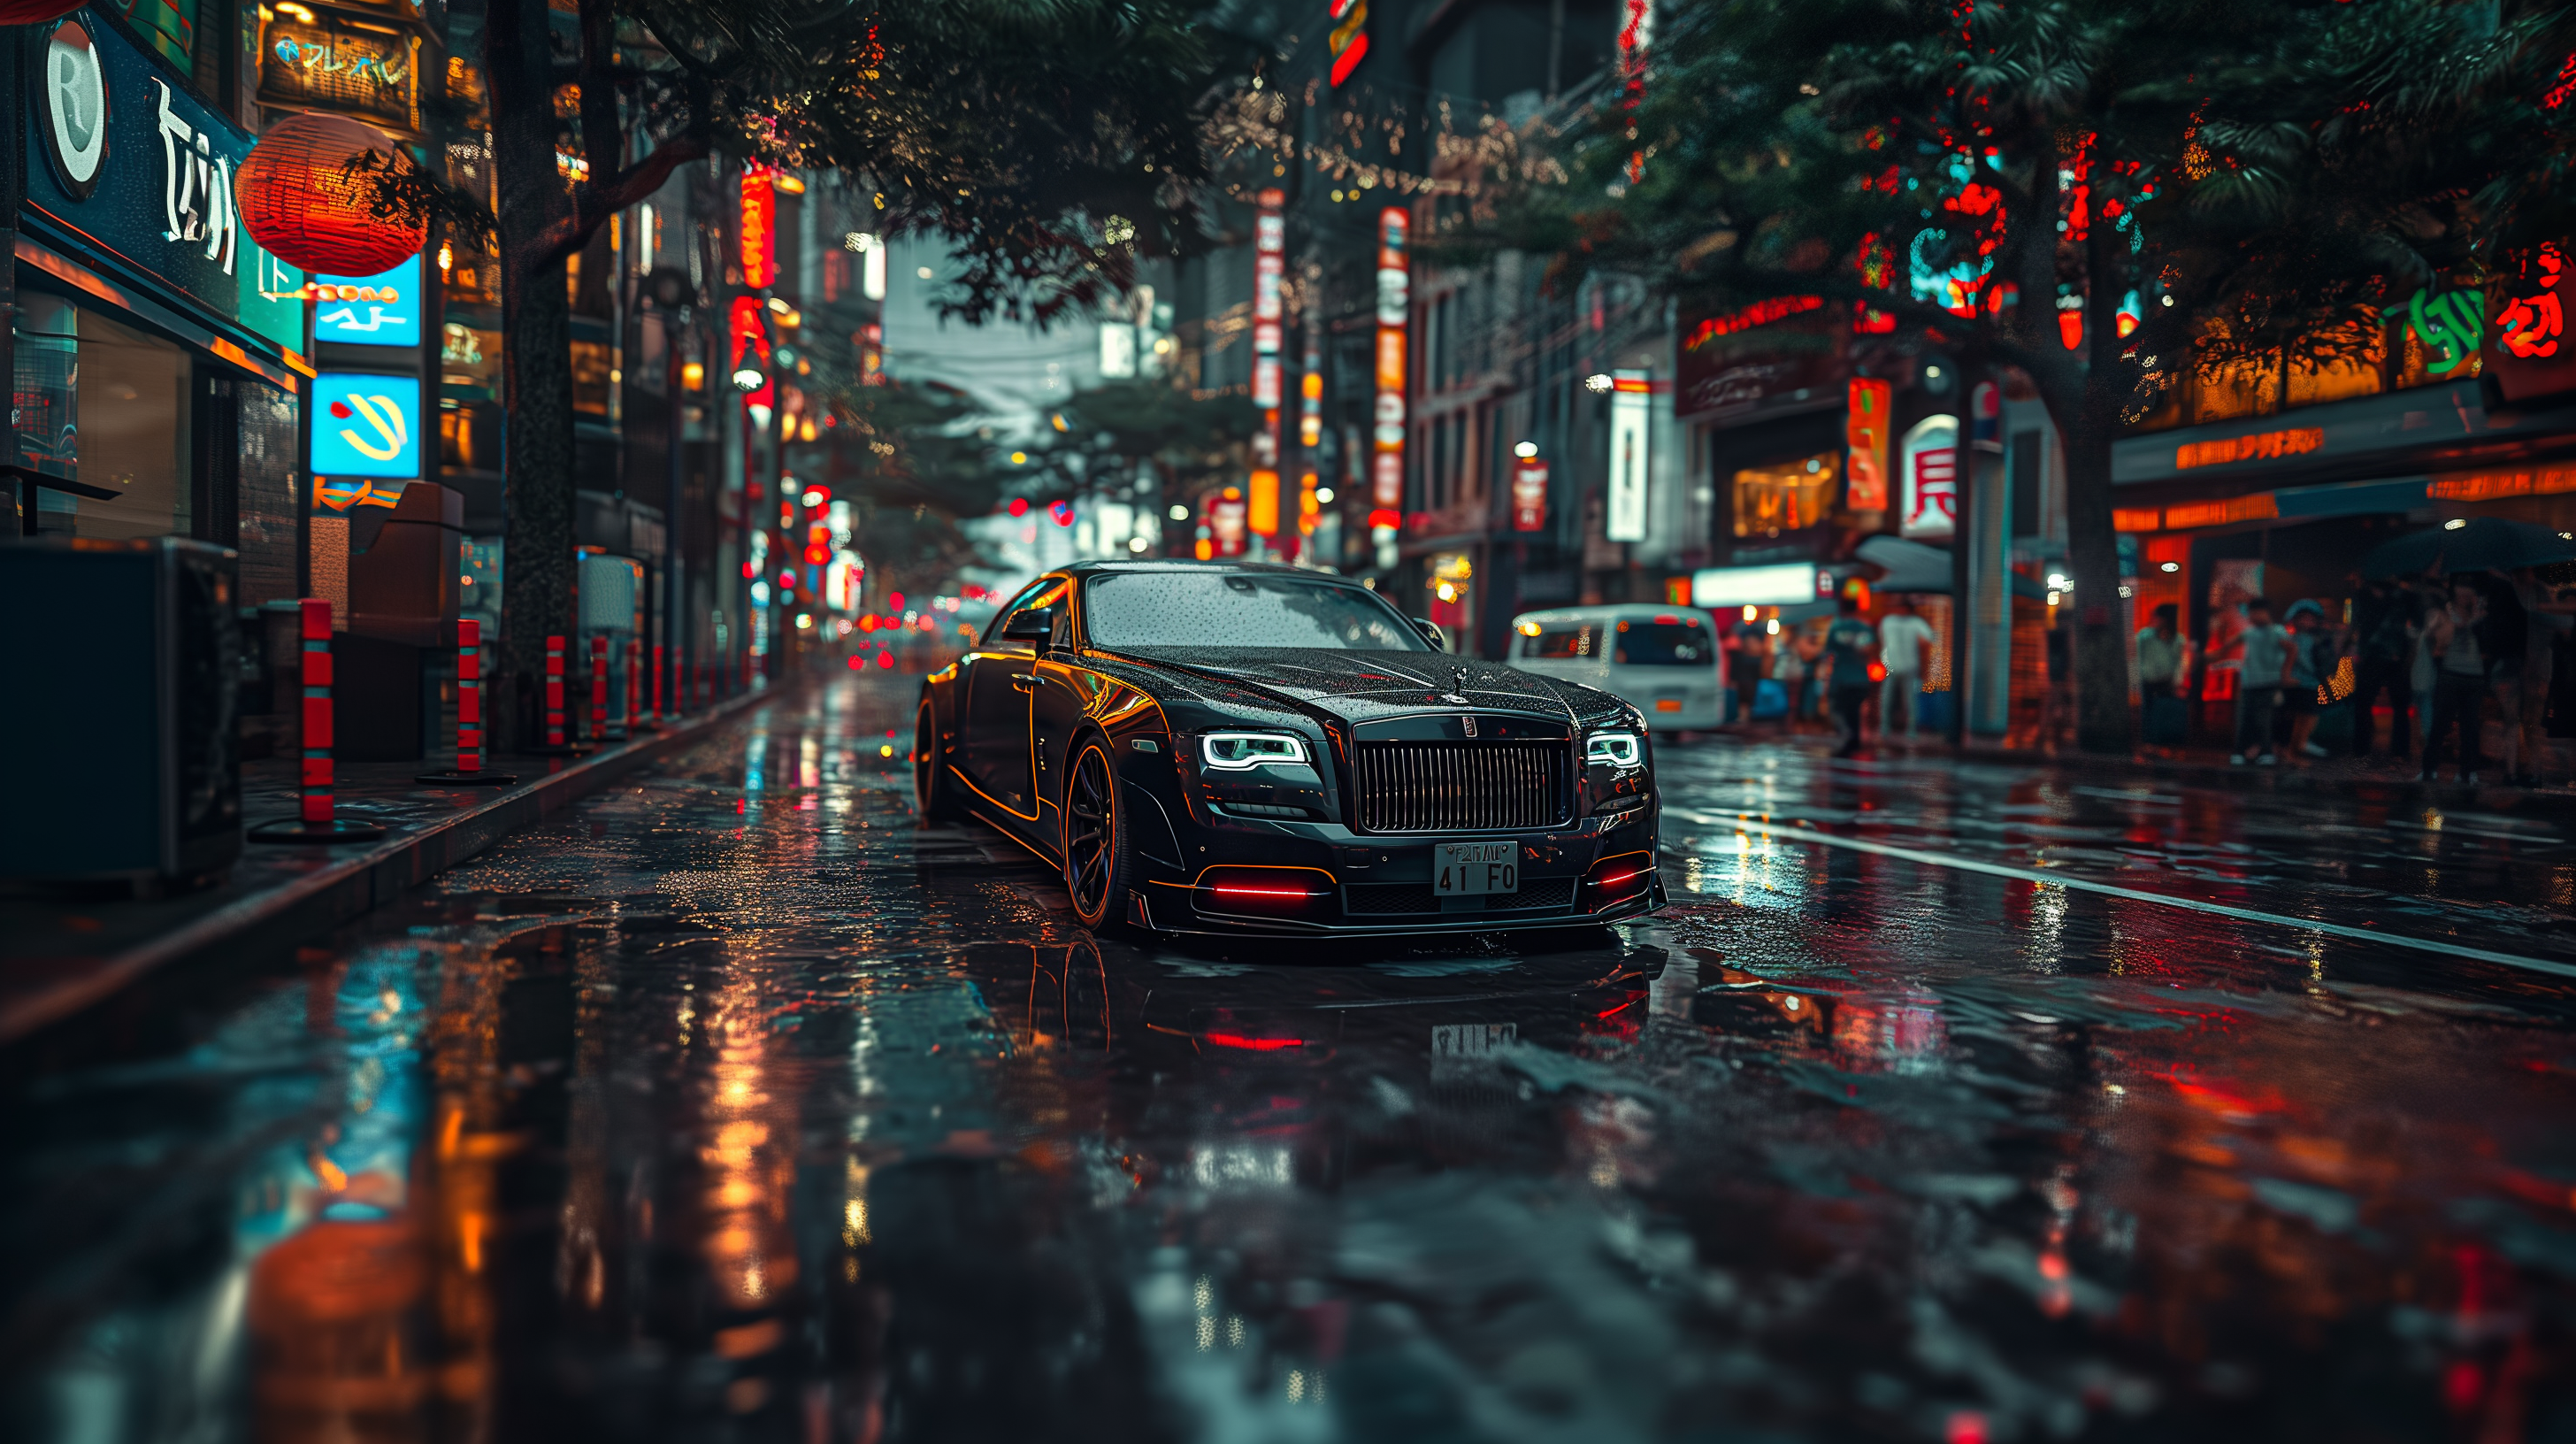 General 2912x1632 car Rolls Royce Wraith AI art cyberpunk frontal view headlights vehicle depth of field trees signs building city lights reflection people road wet wet road